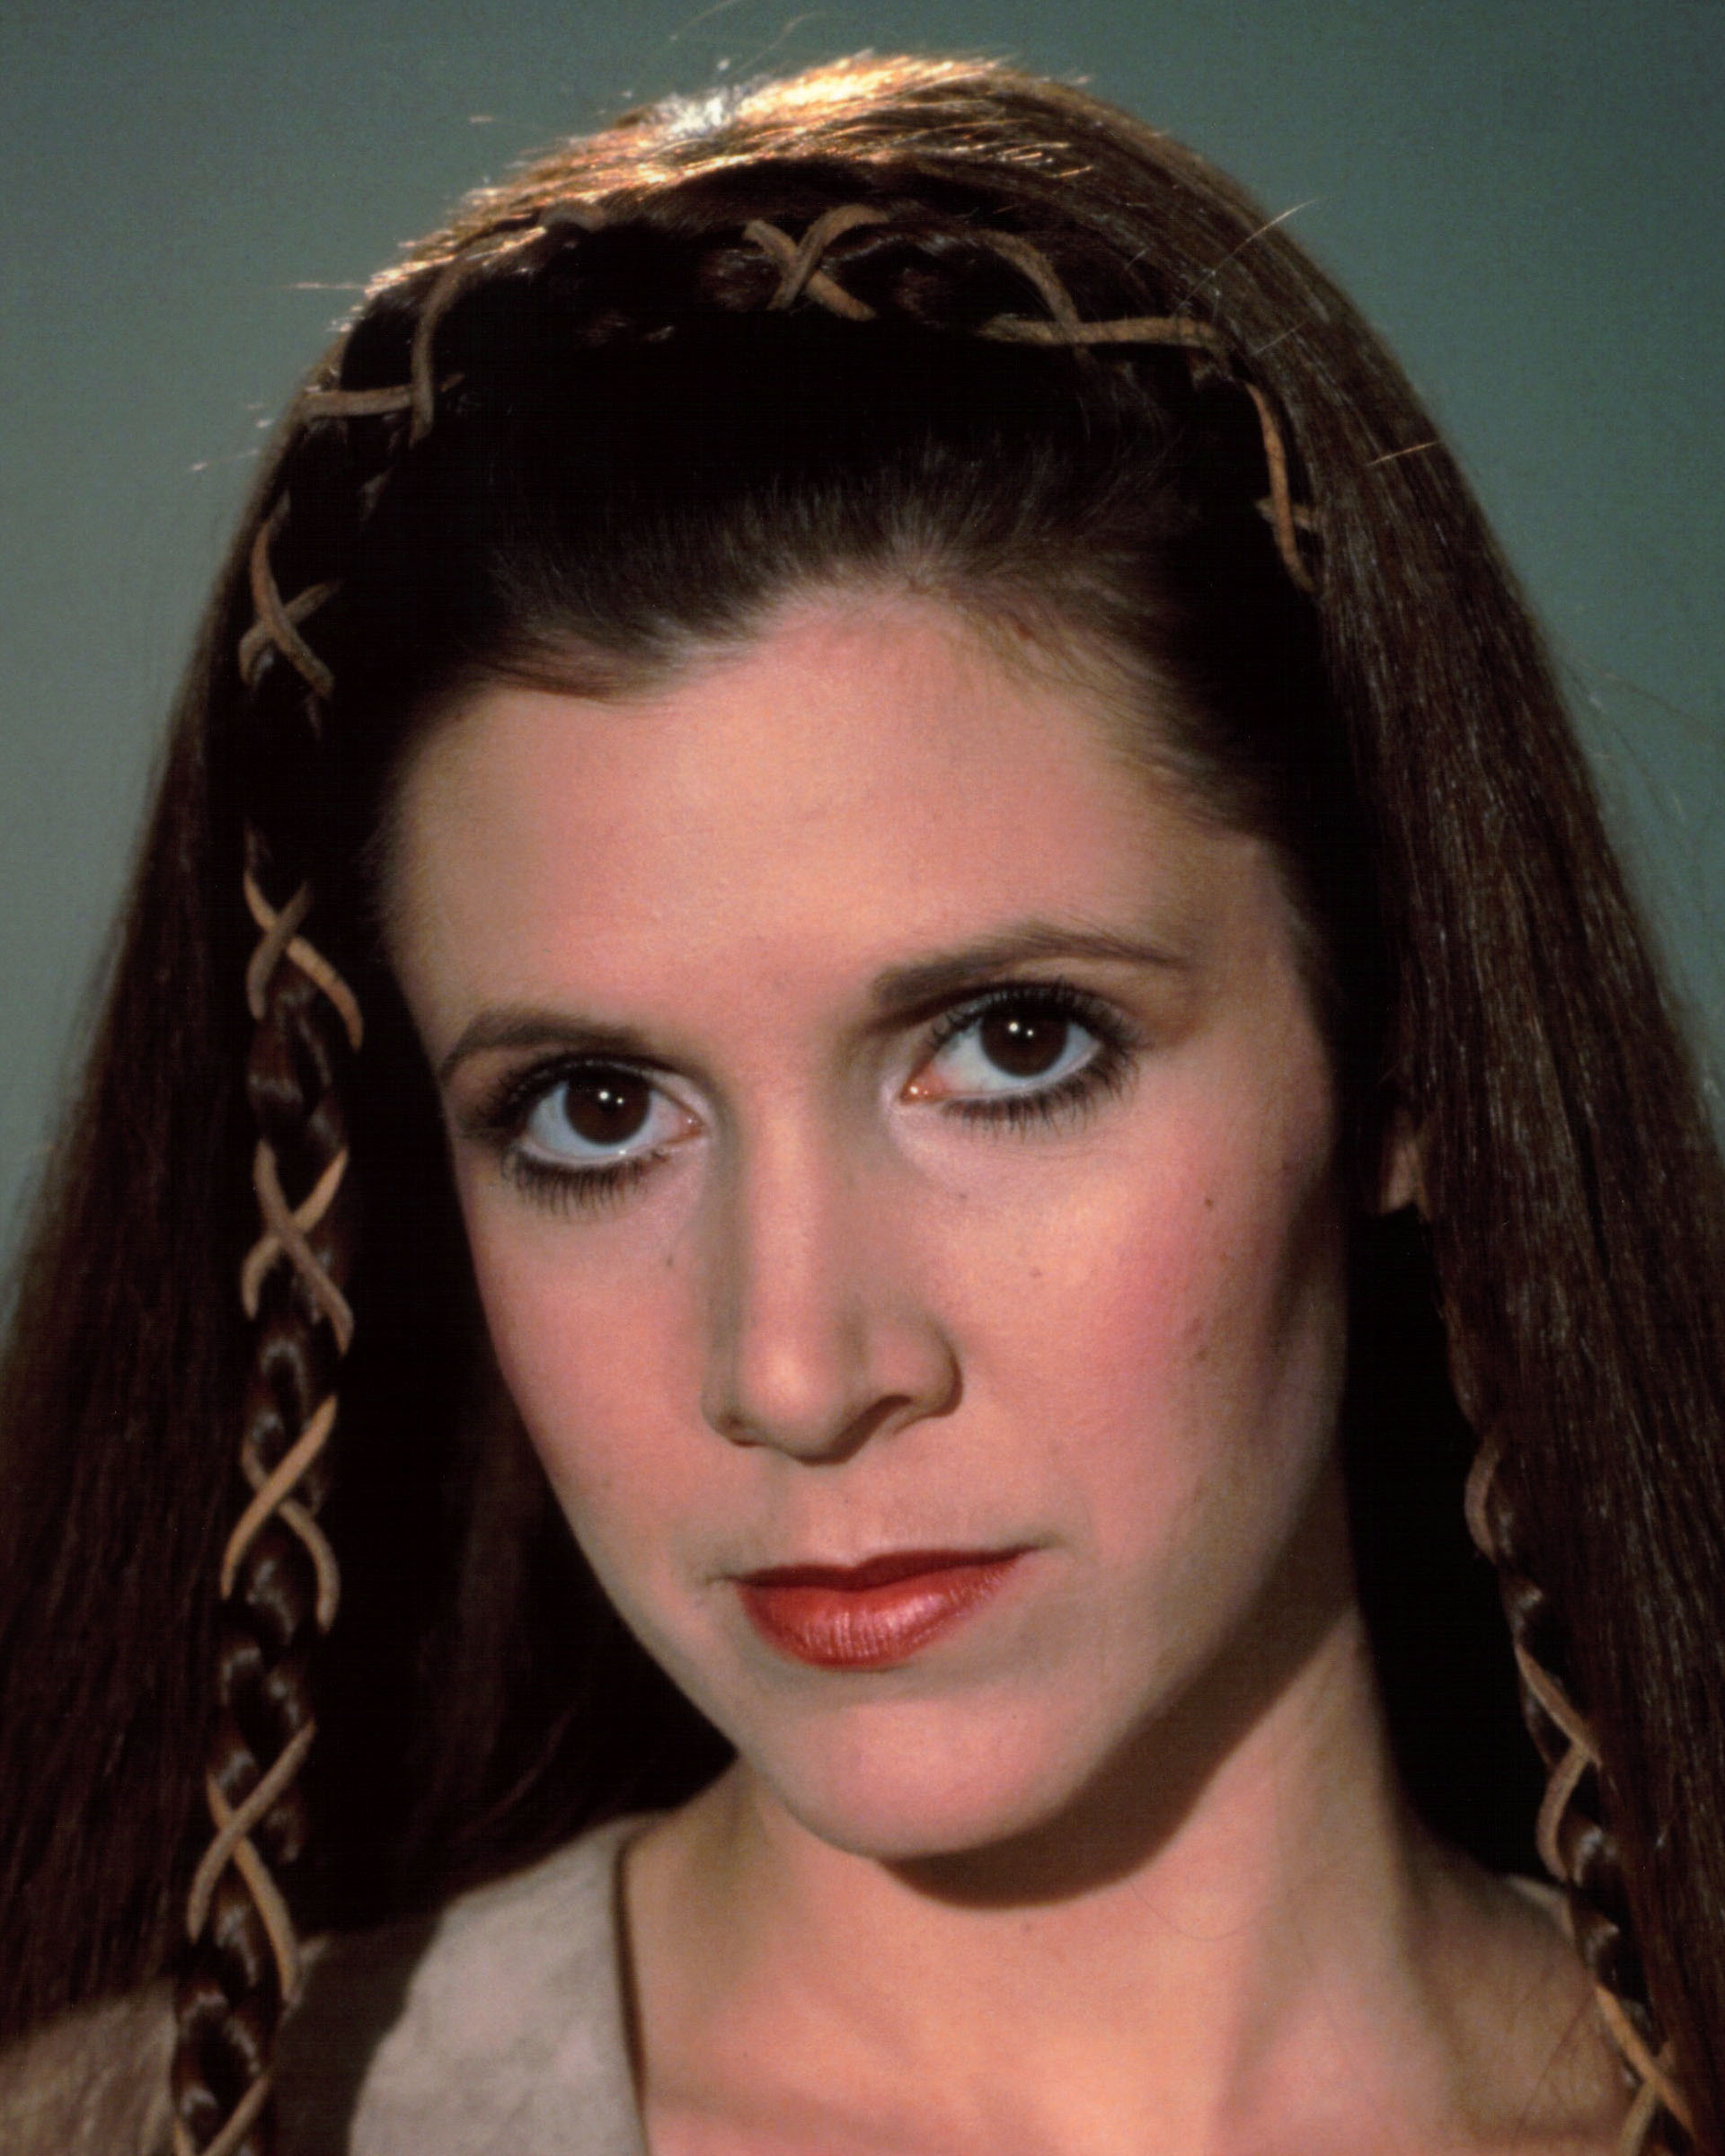 Albums 101+ Images images of princess leia from star wars Stunning